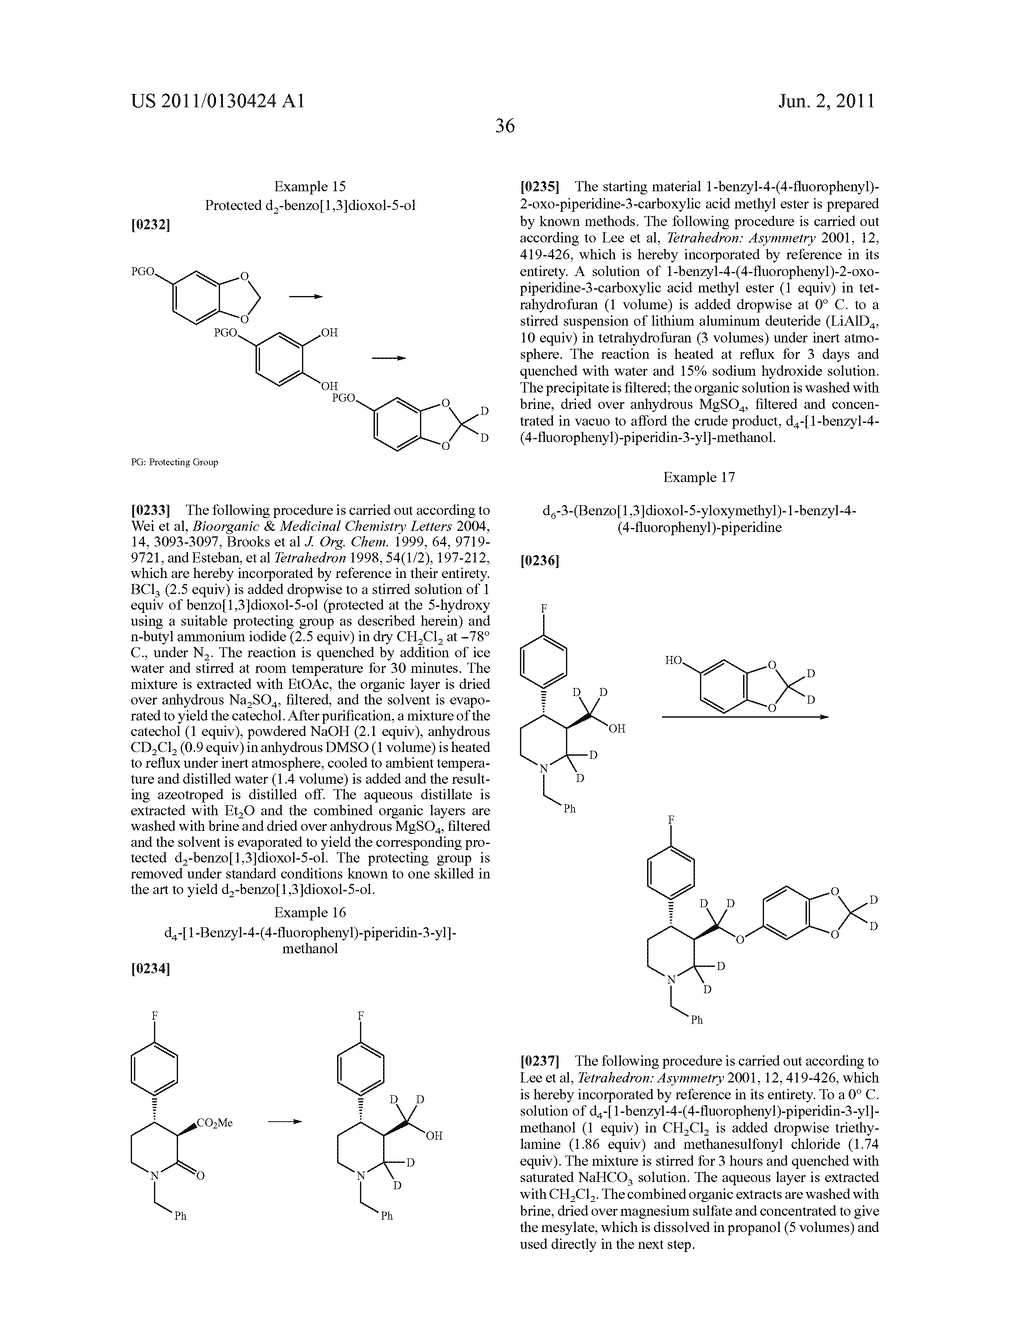 SUBSTITUTED PHENYLPIPERIDINES WITH SEROTONINERGIC ACTIVITY AND ENHANCED     THERAPEUTIC PROPERTIES - diagram, schematic, and image 37